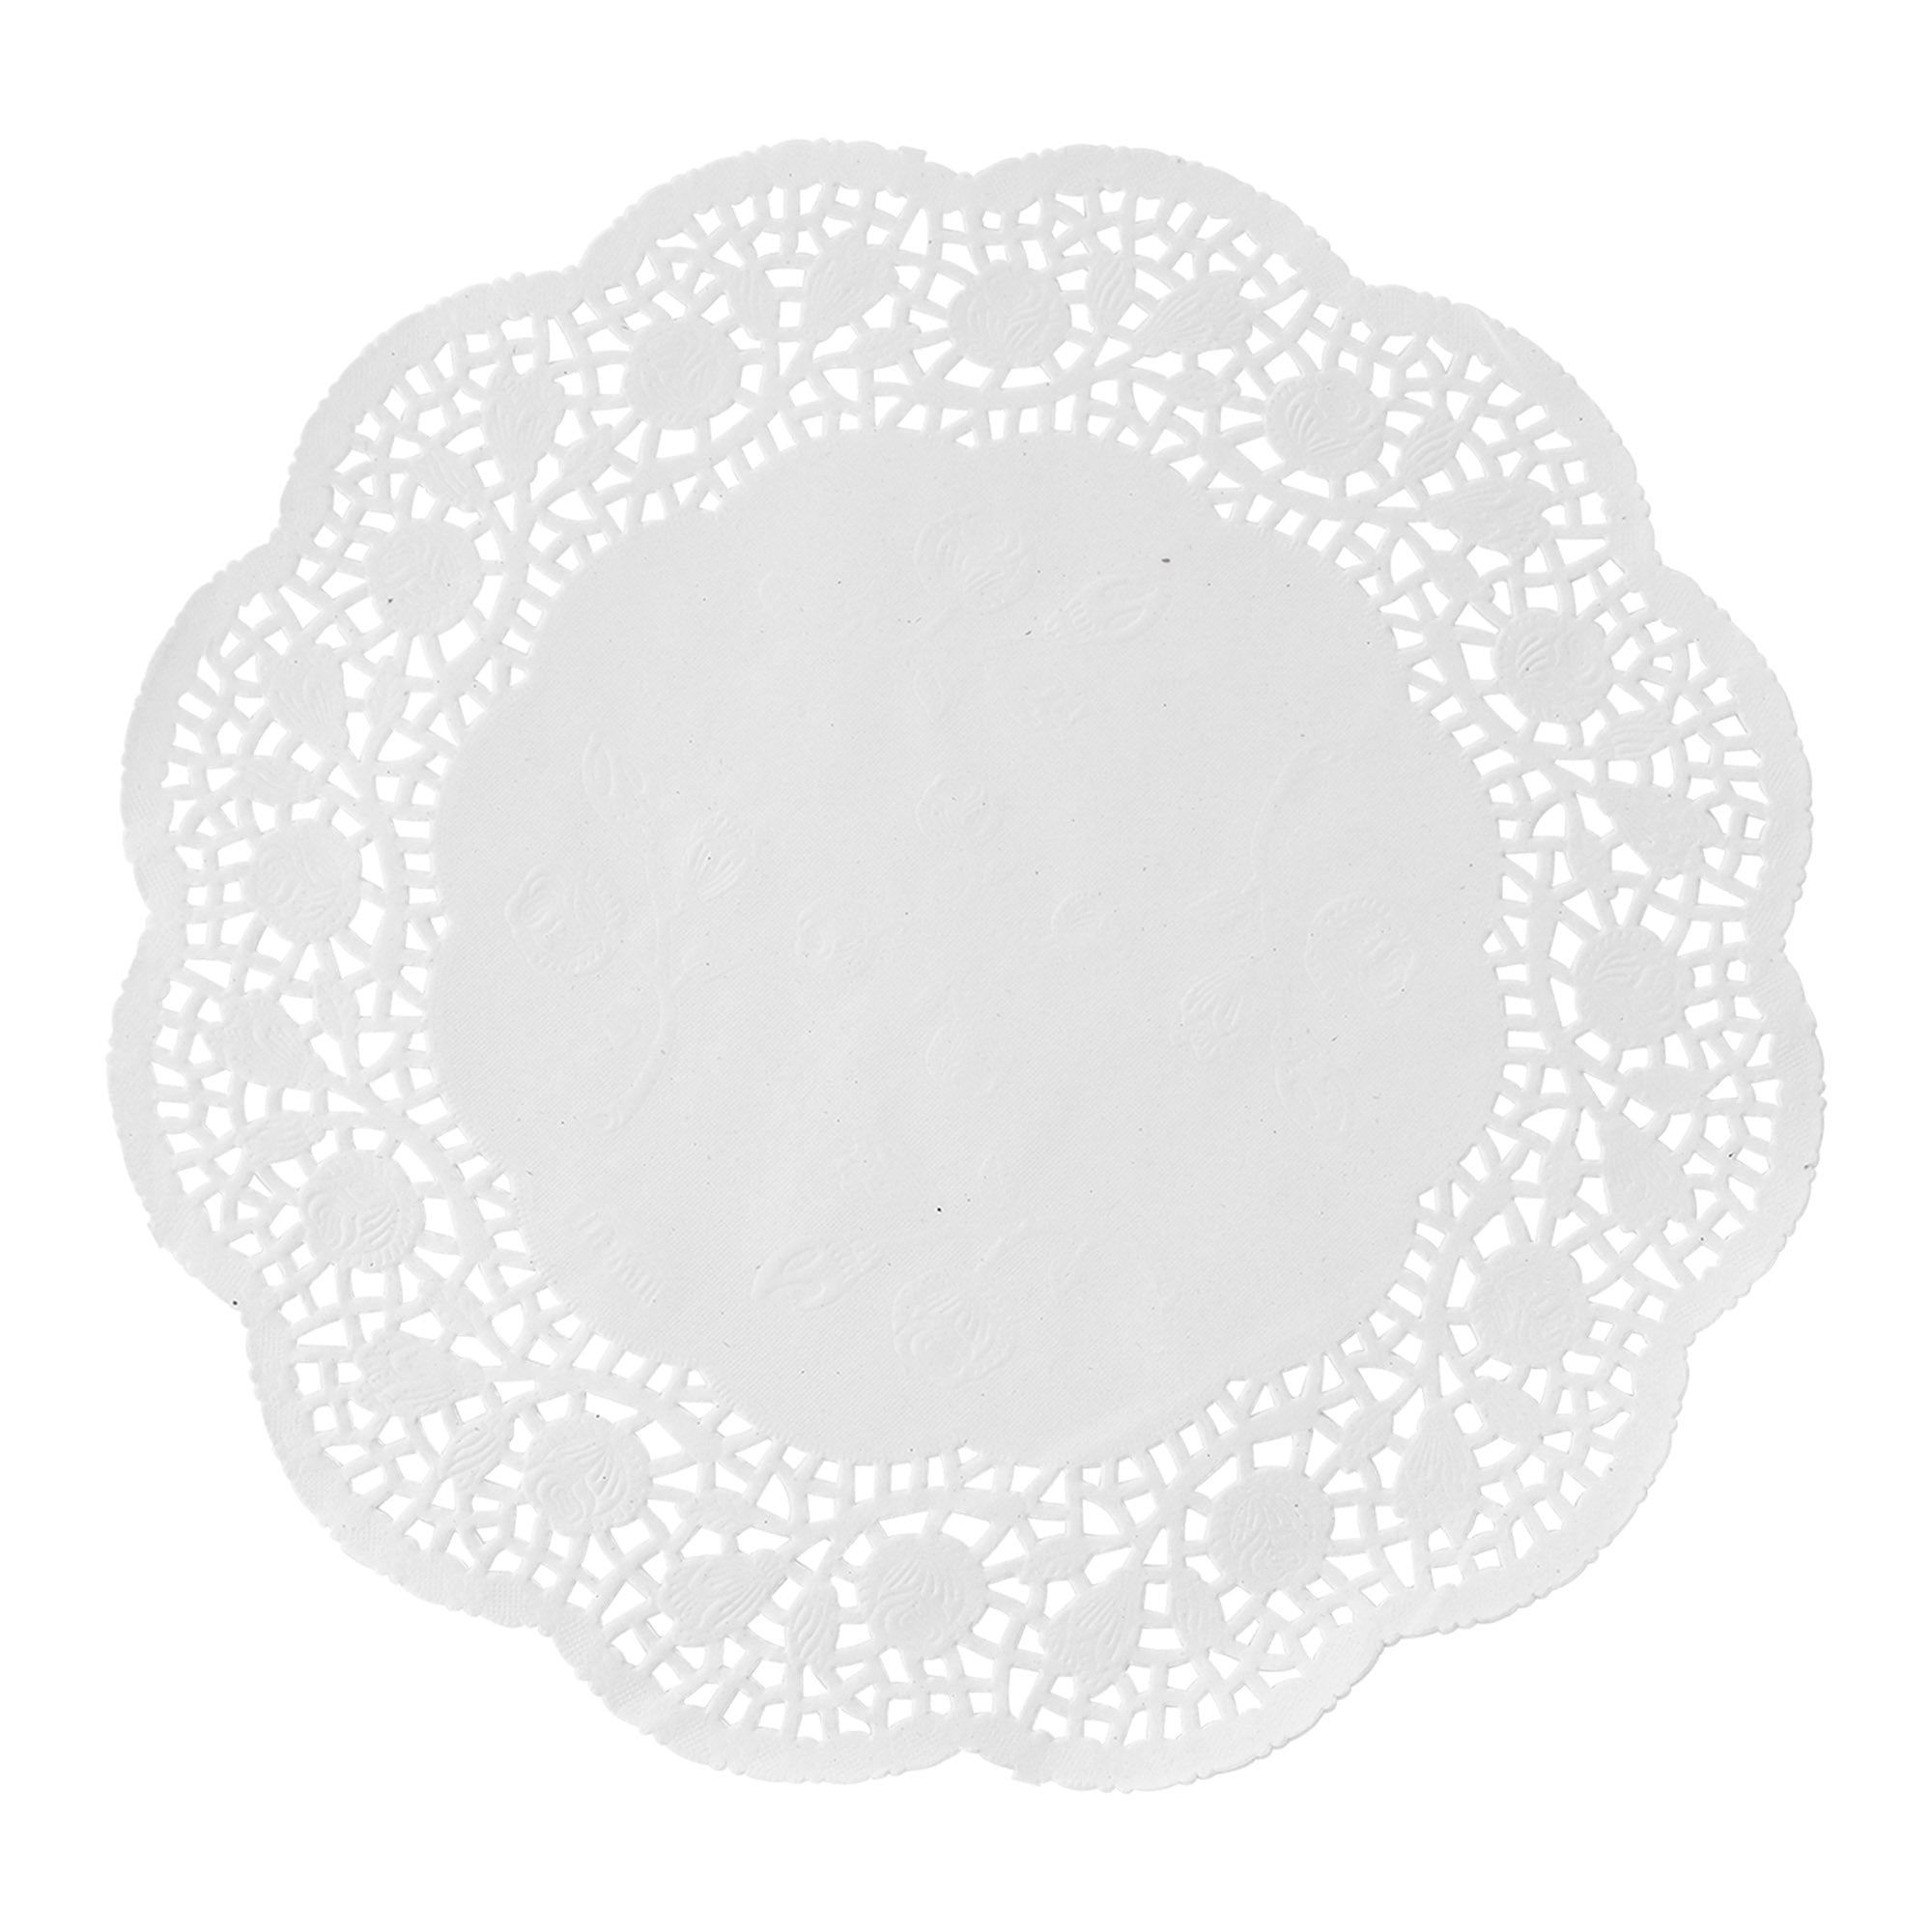 Scalloped Round Paper Doilies, Assorted Sizes, White, 32ct 